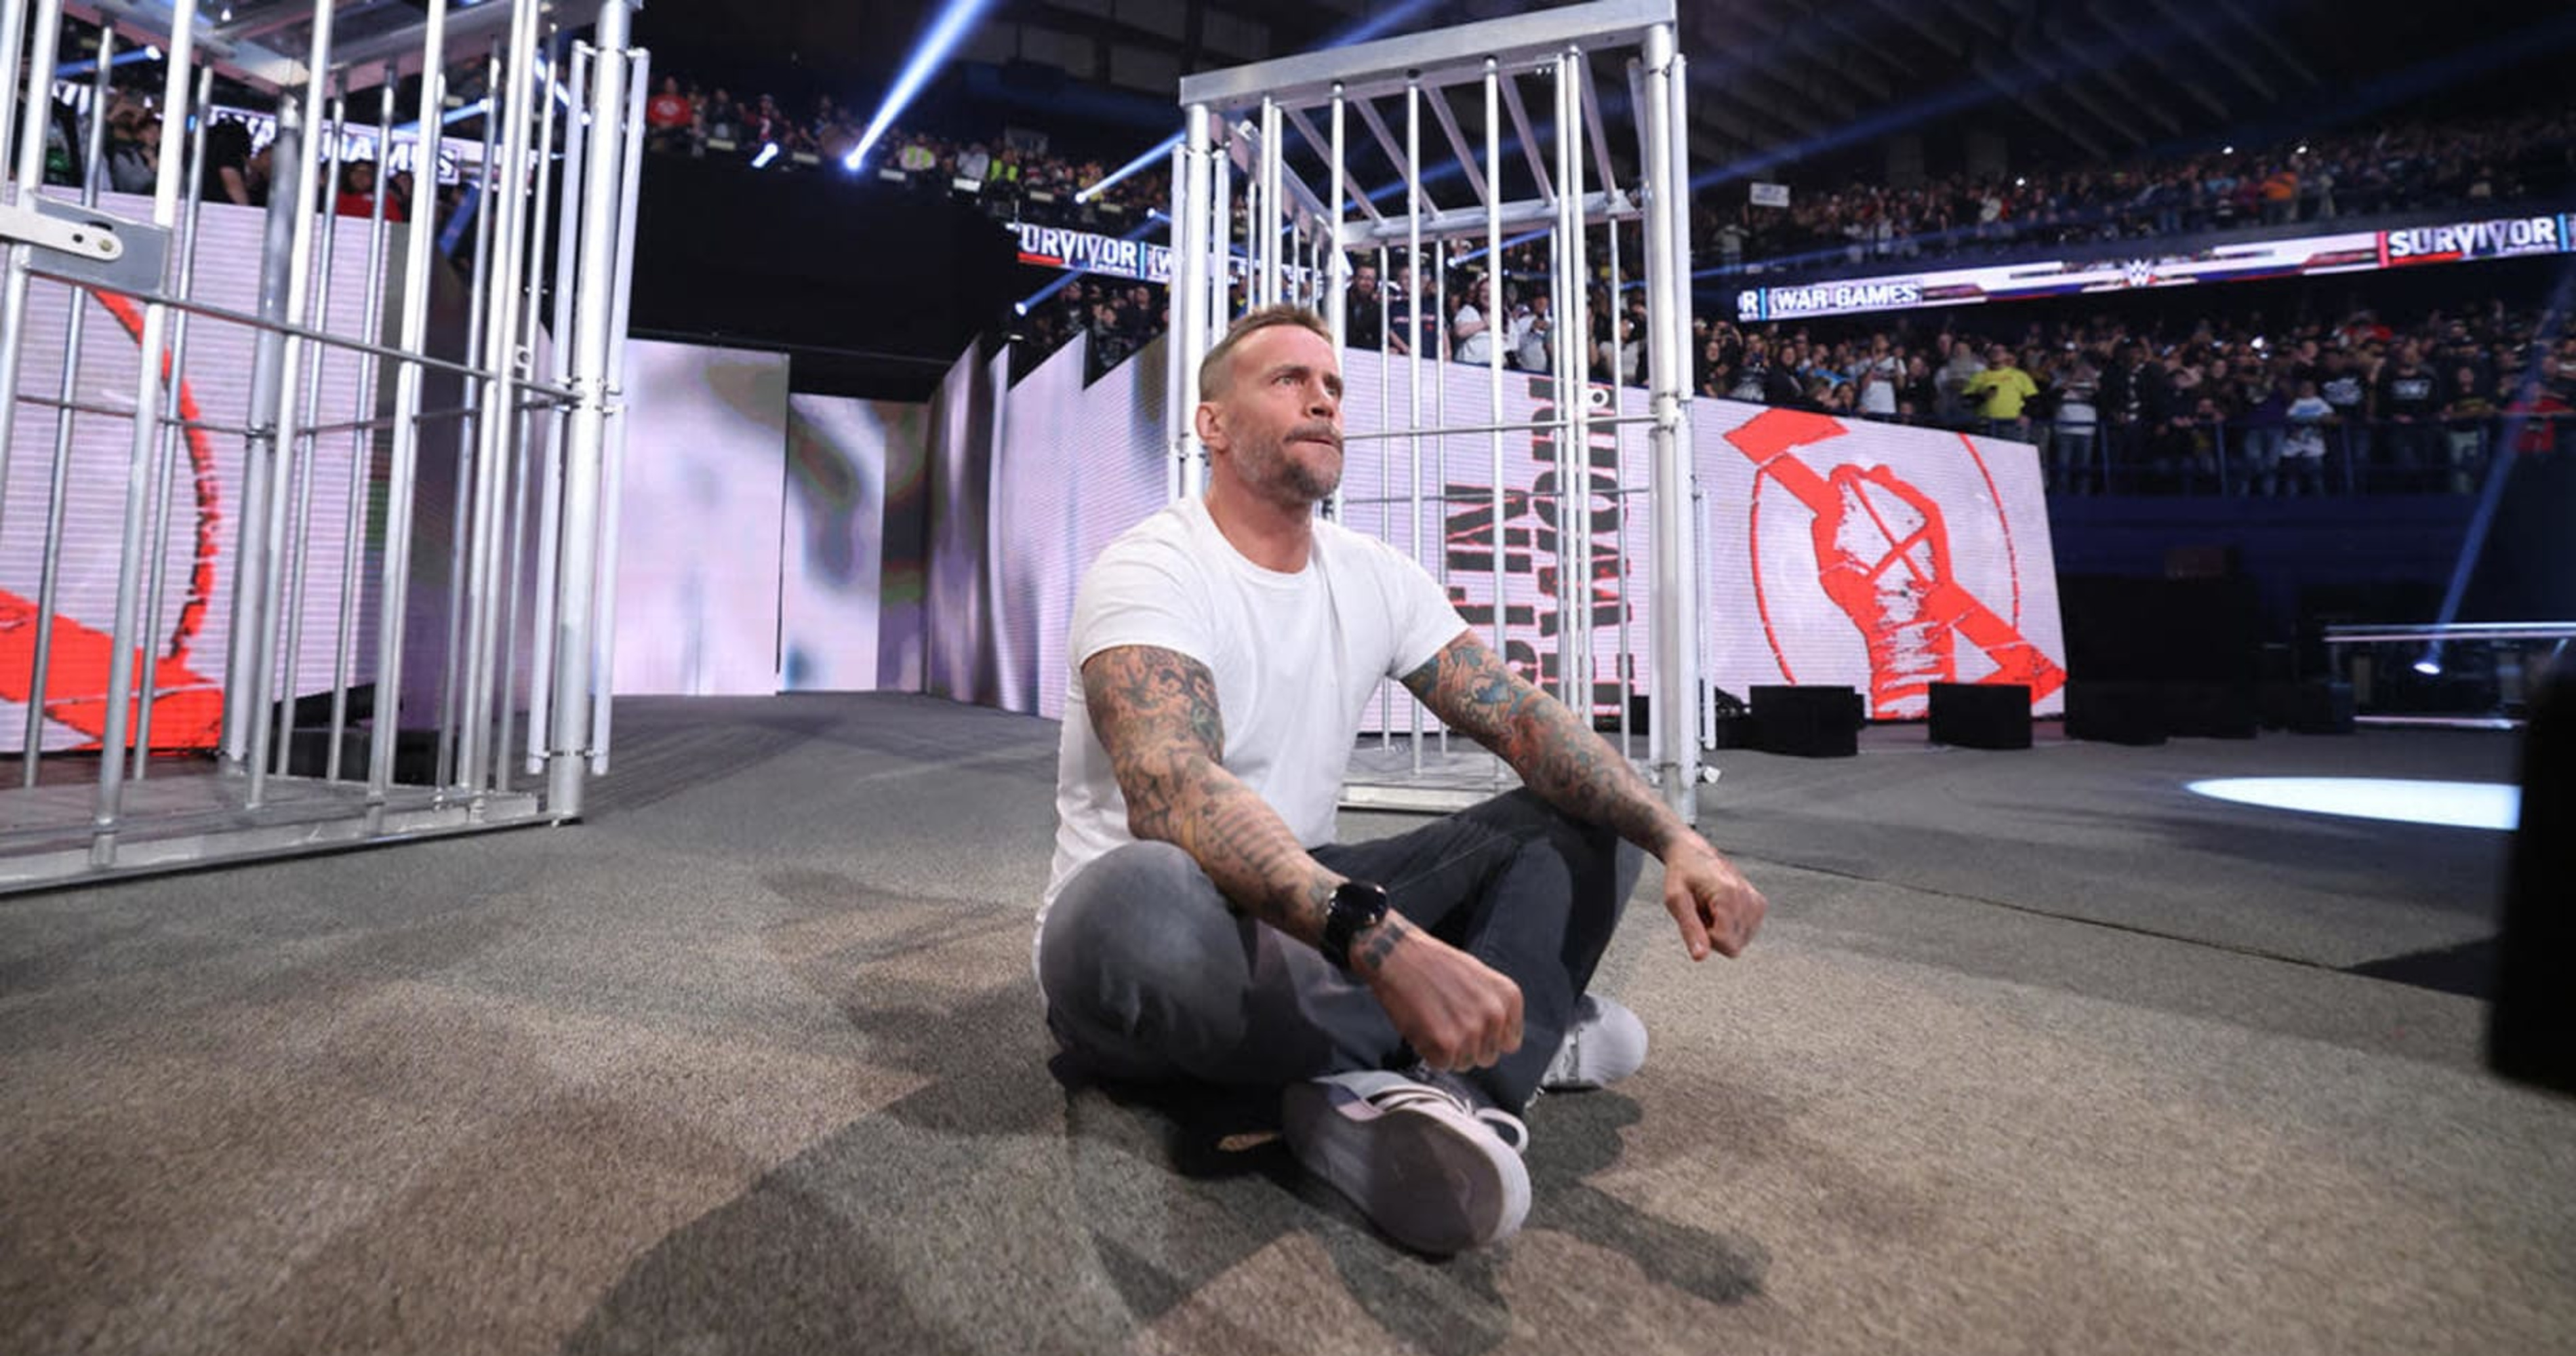 WWE: Potential spoiler on CM Punk's WrestleMania 40 opponent - Reports